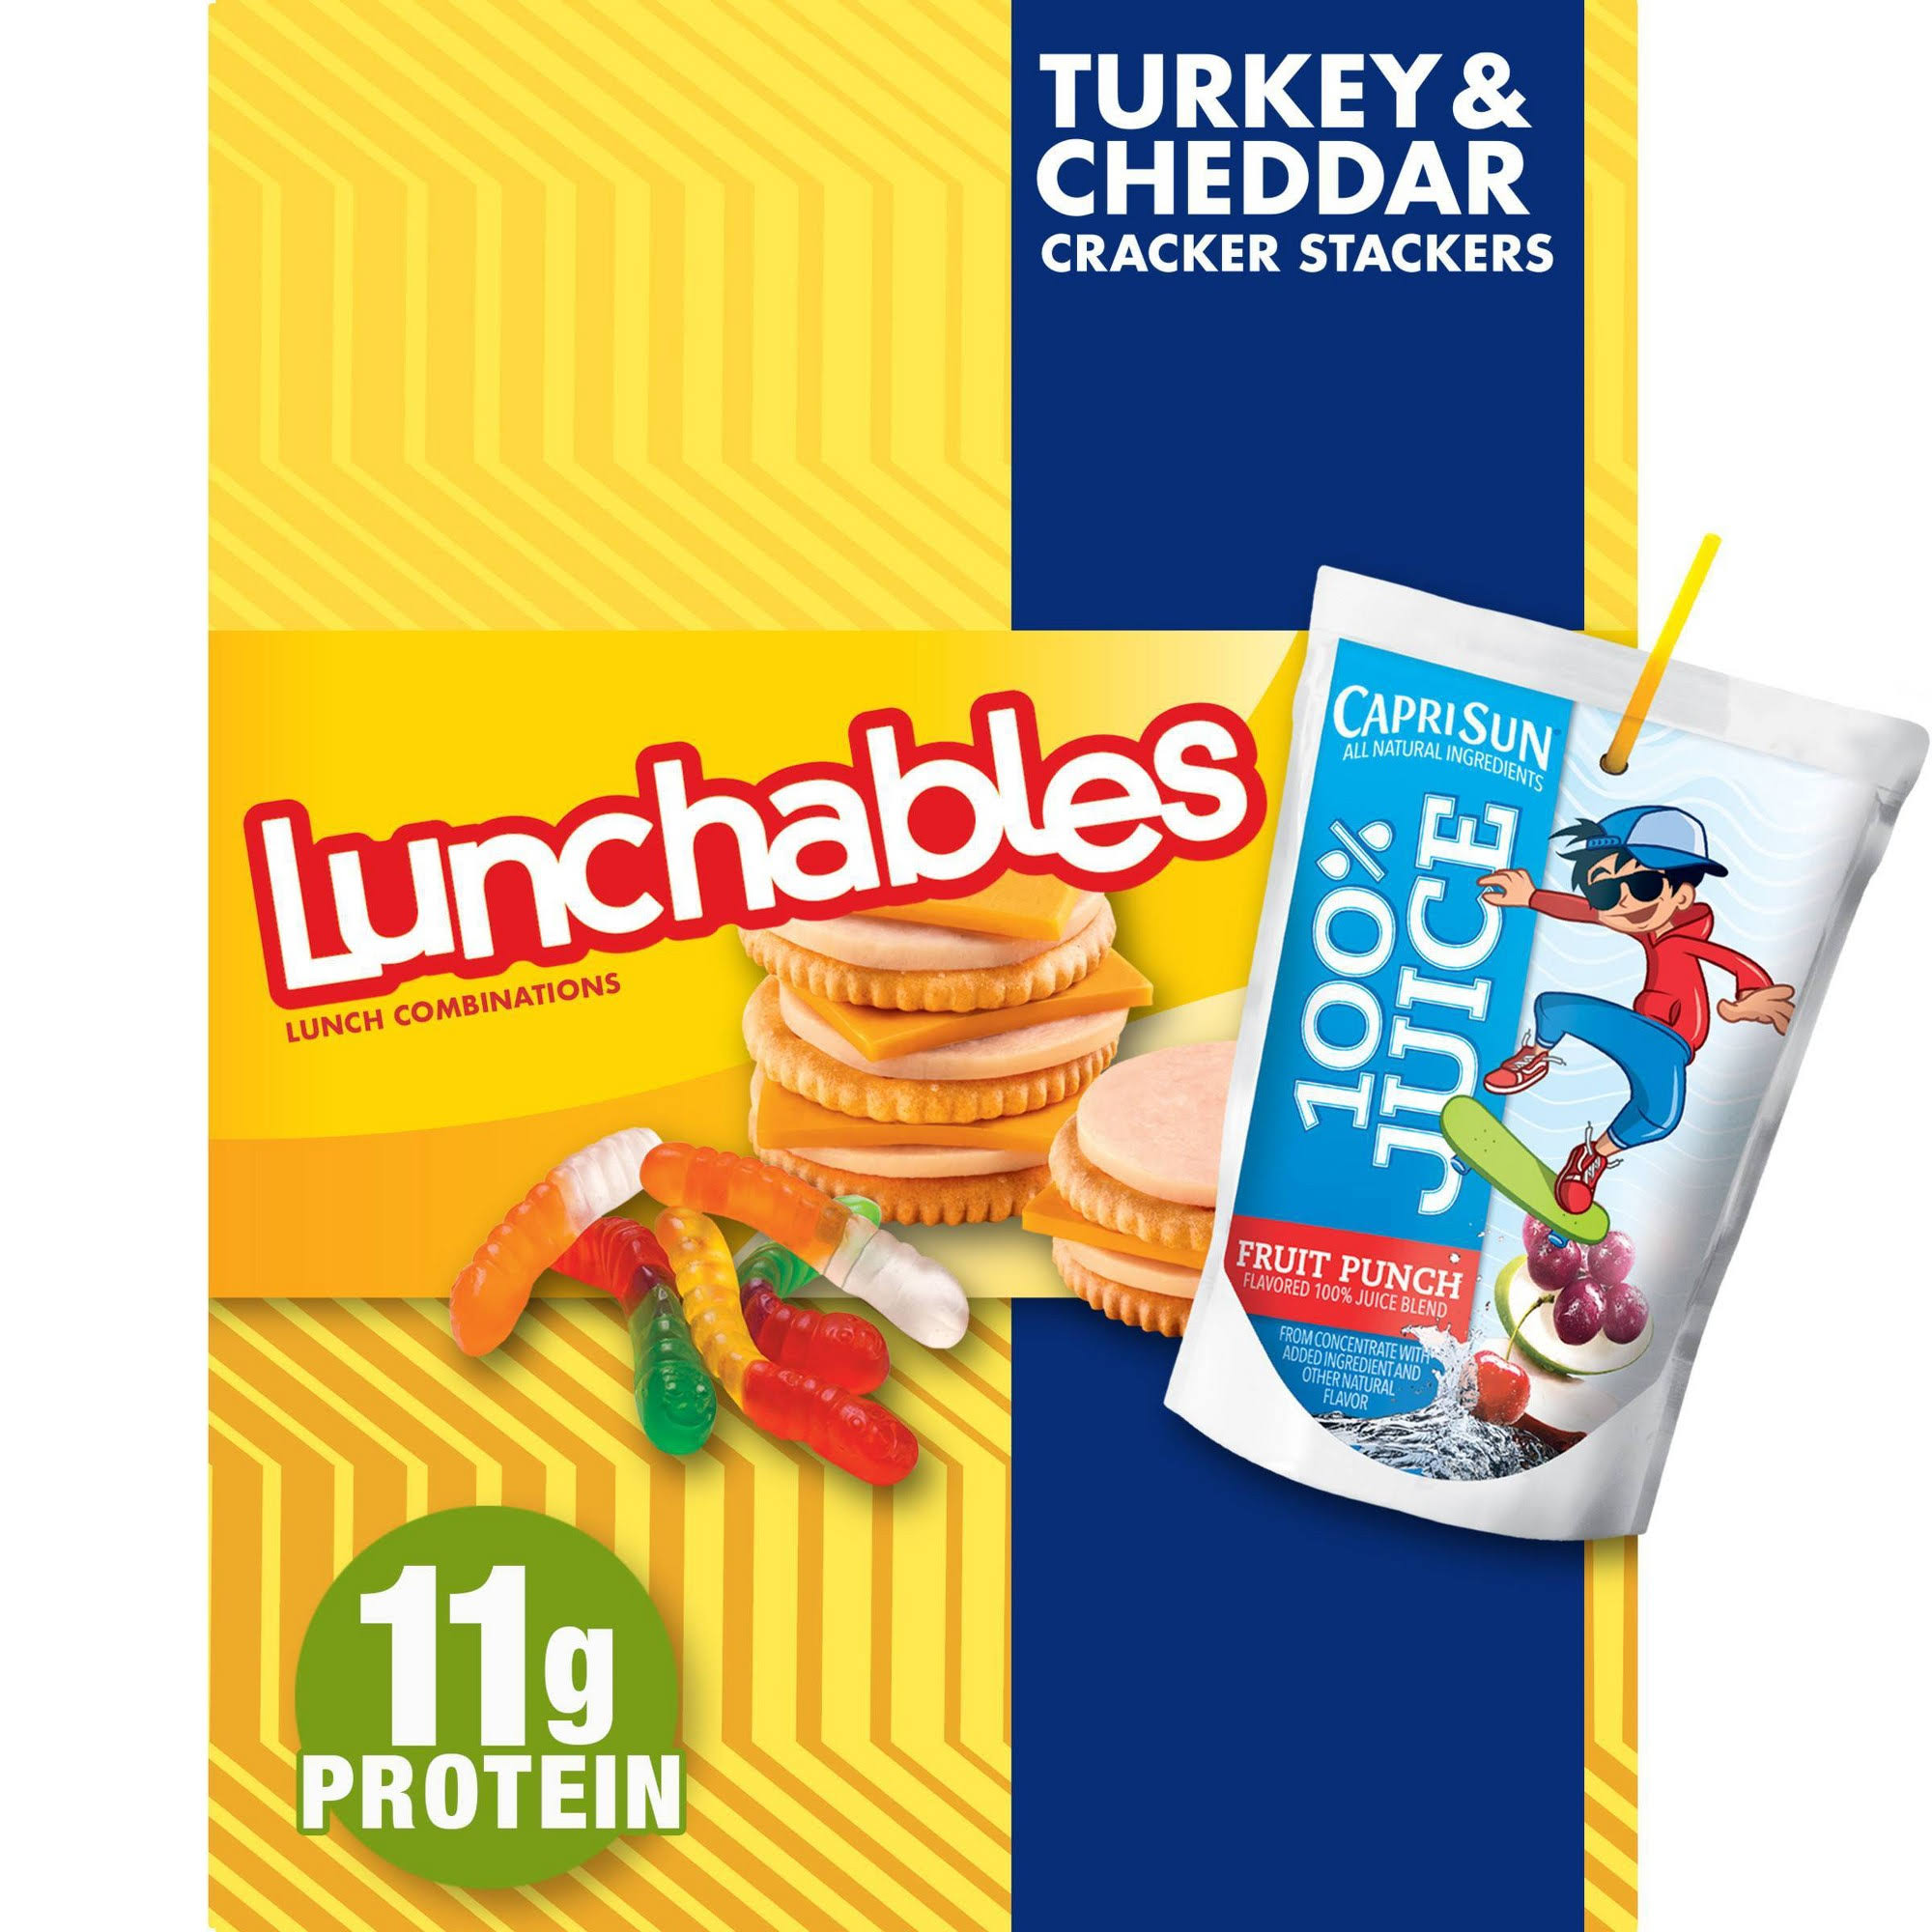 Lunchables Turkey & Cheddar Cracker Stackers - With 100% Juice Lunch Combinations, 177ml